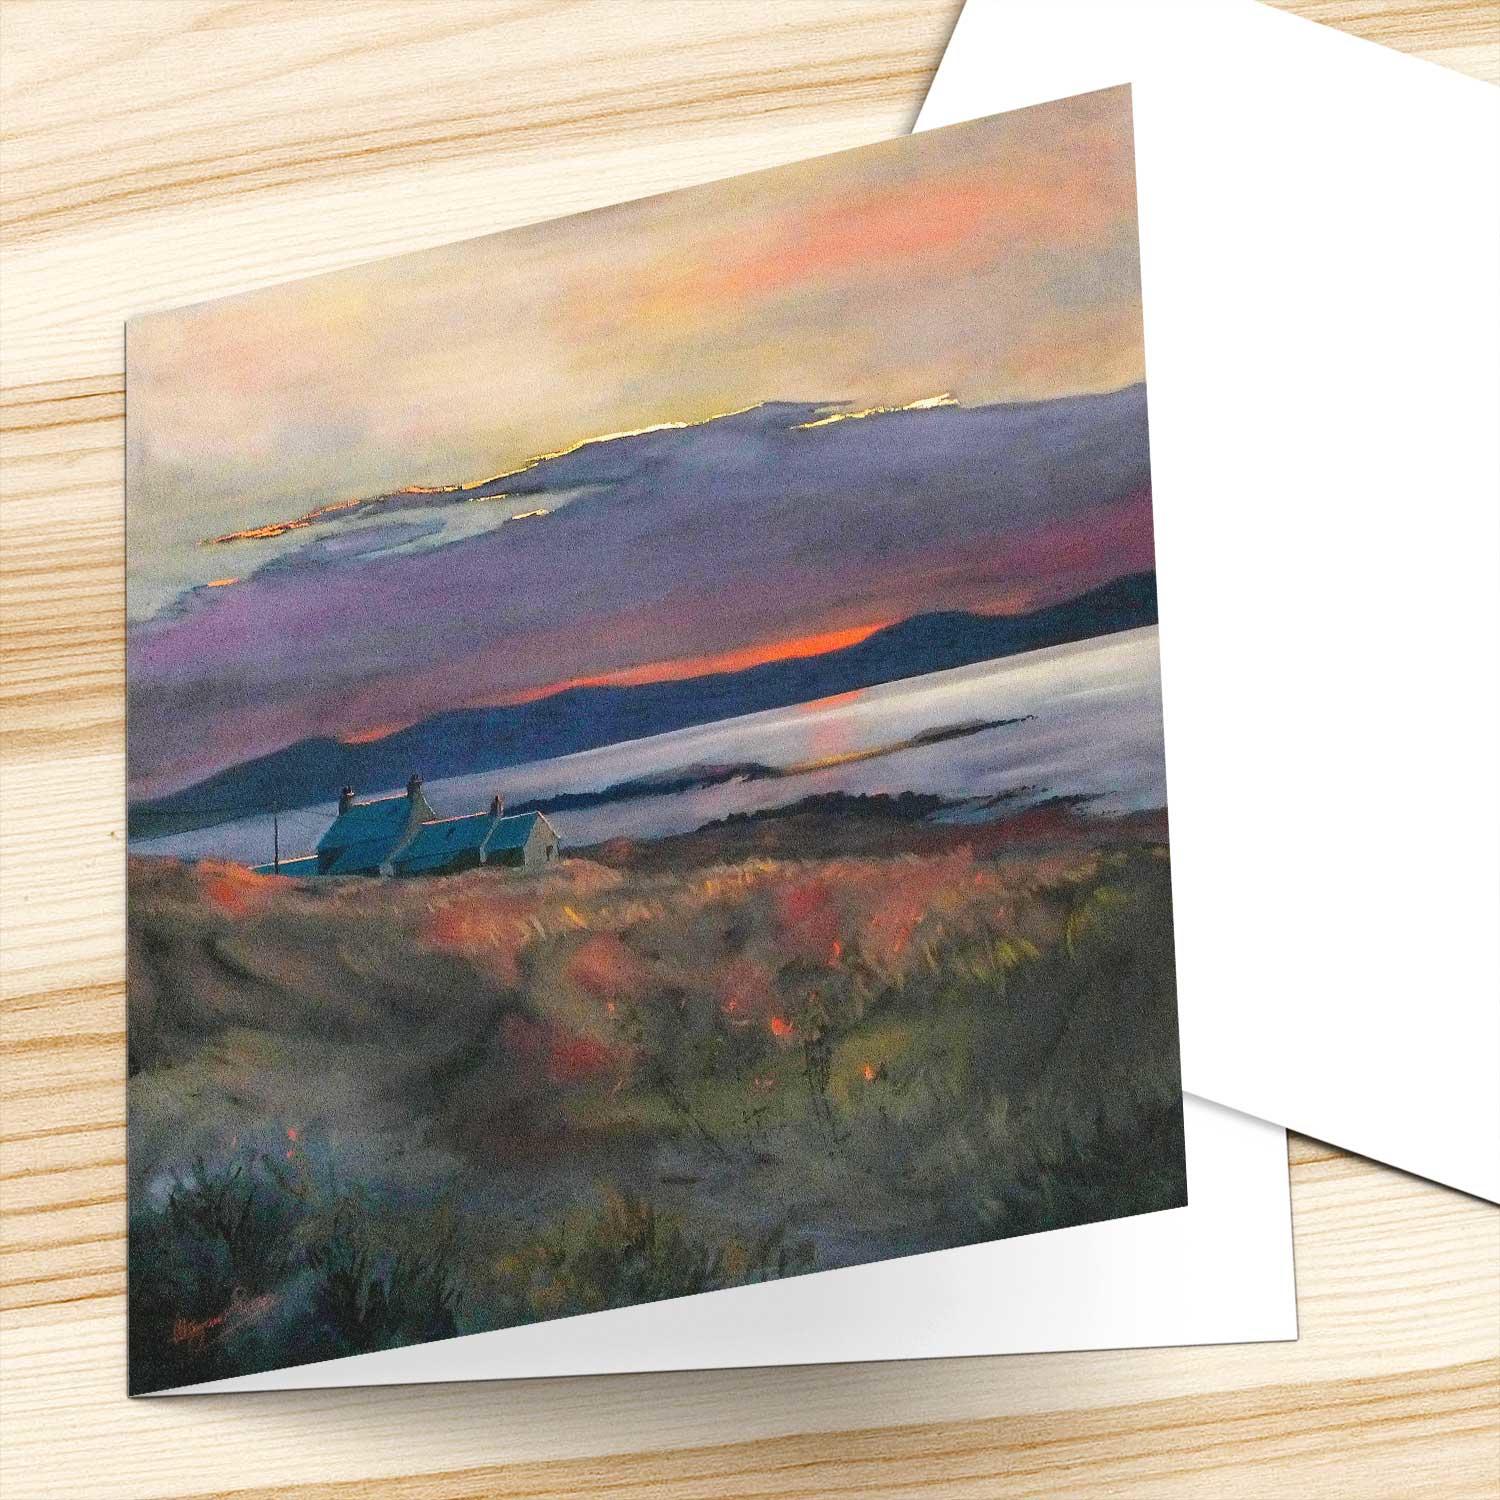 Nightfall, Iona  Greeting Card from an original painting by artist Margaret Evans